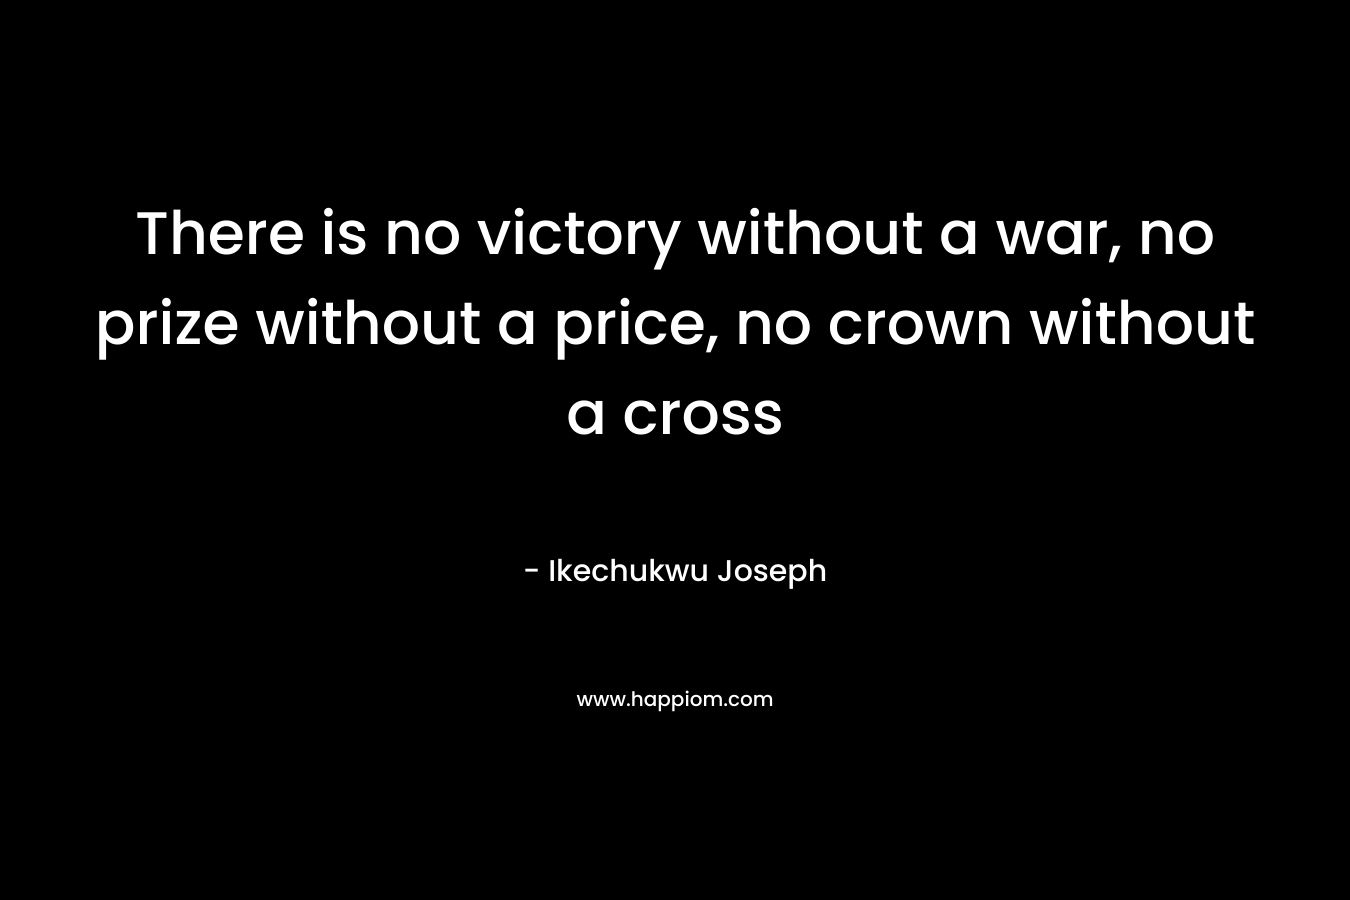 There is no victory without a war, no prize without a price, no crown without a cross – Ikechukwu Joseph